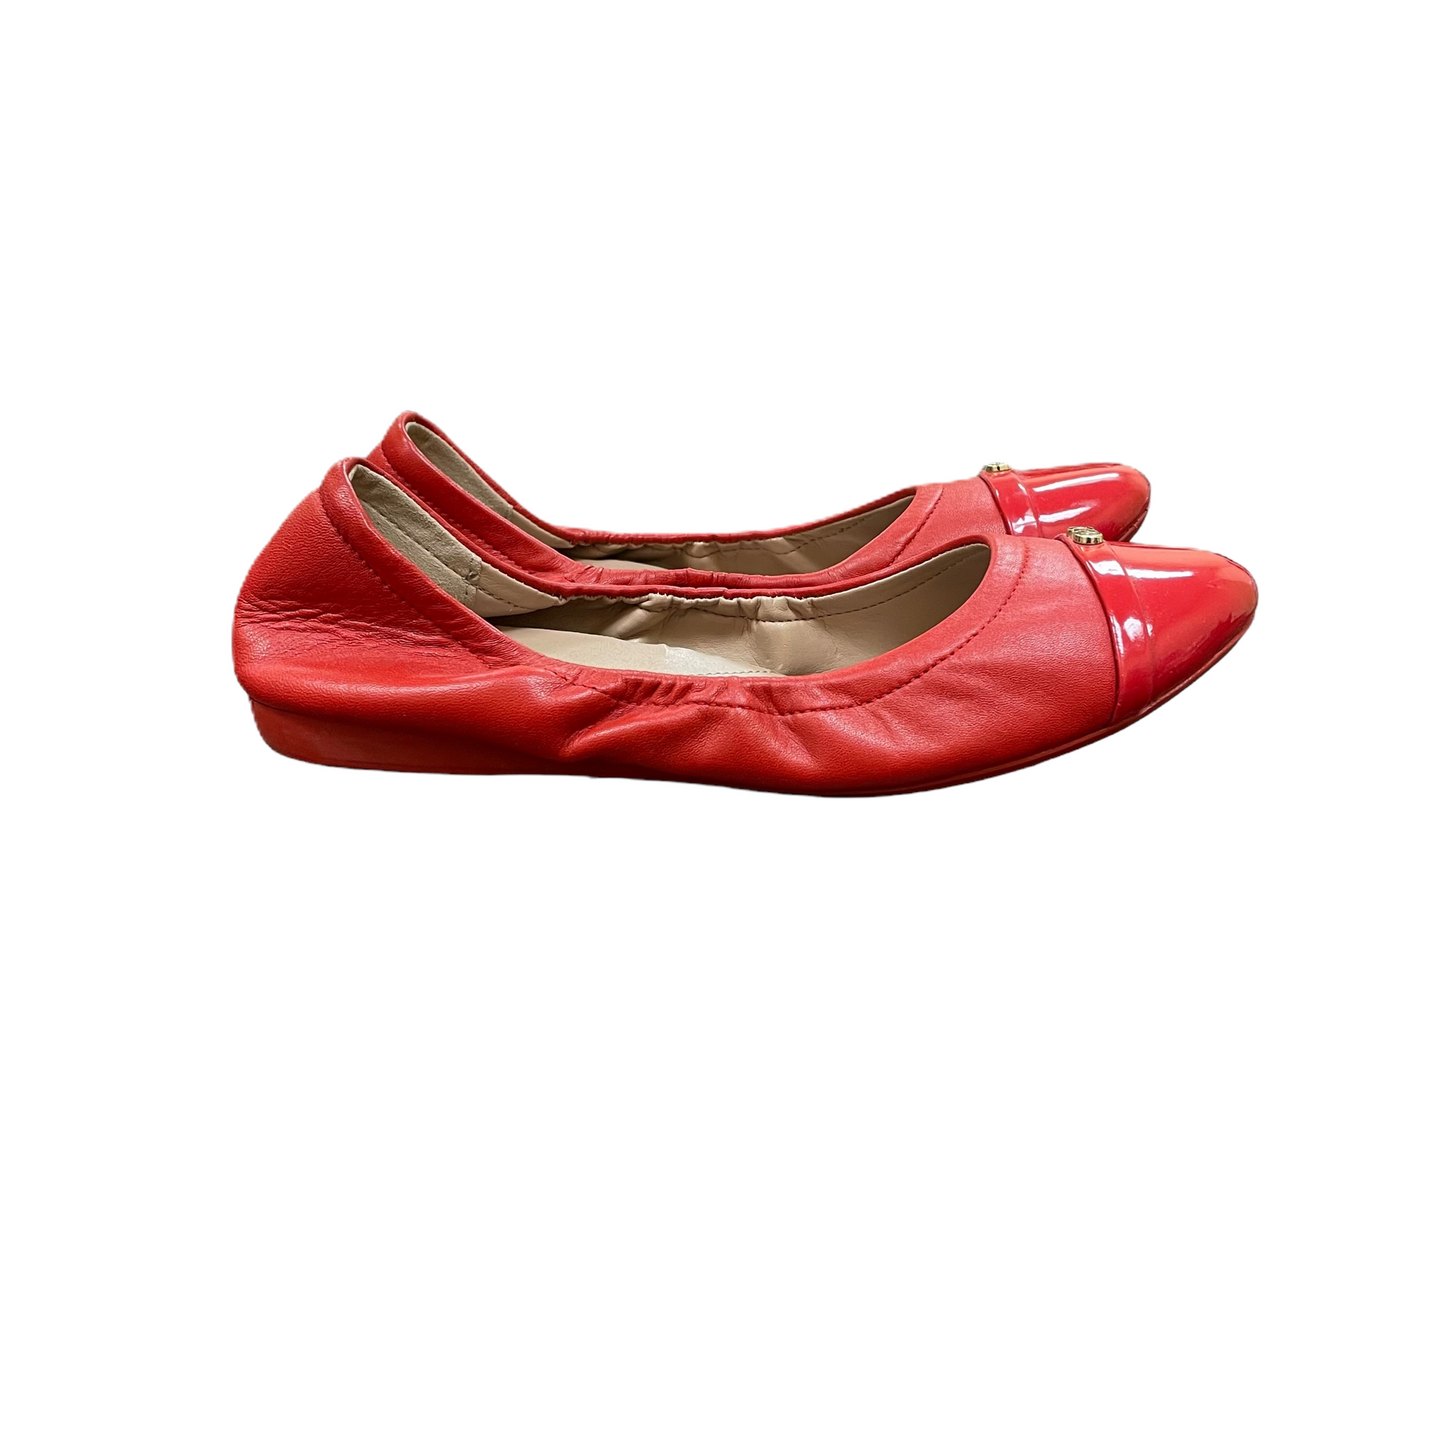 Red Shoes Flats By Cole-haan, Size: 6.5